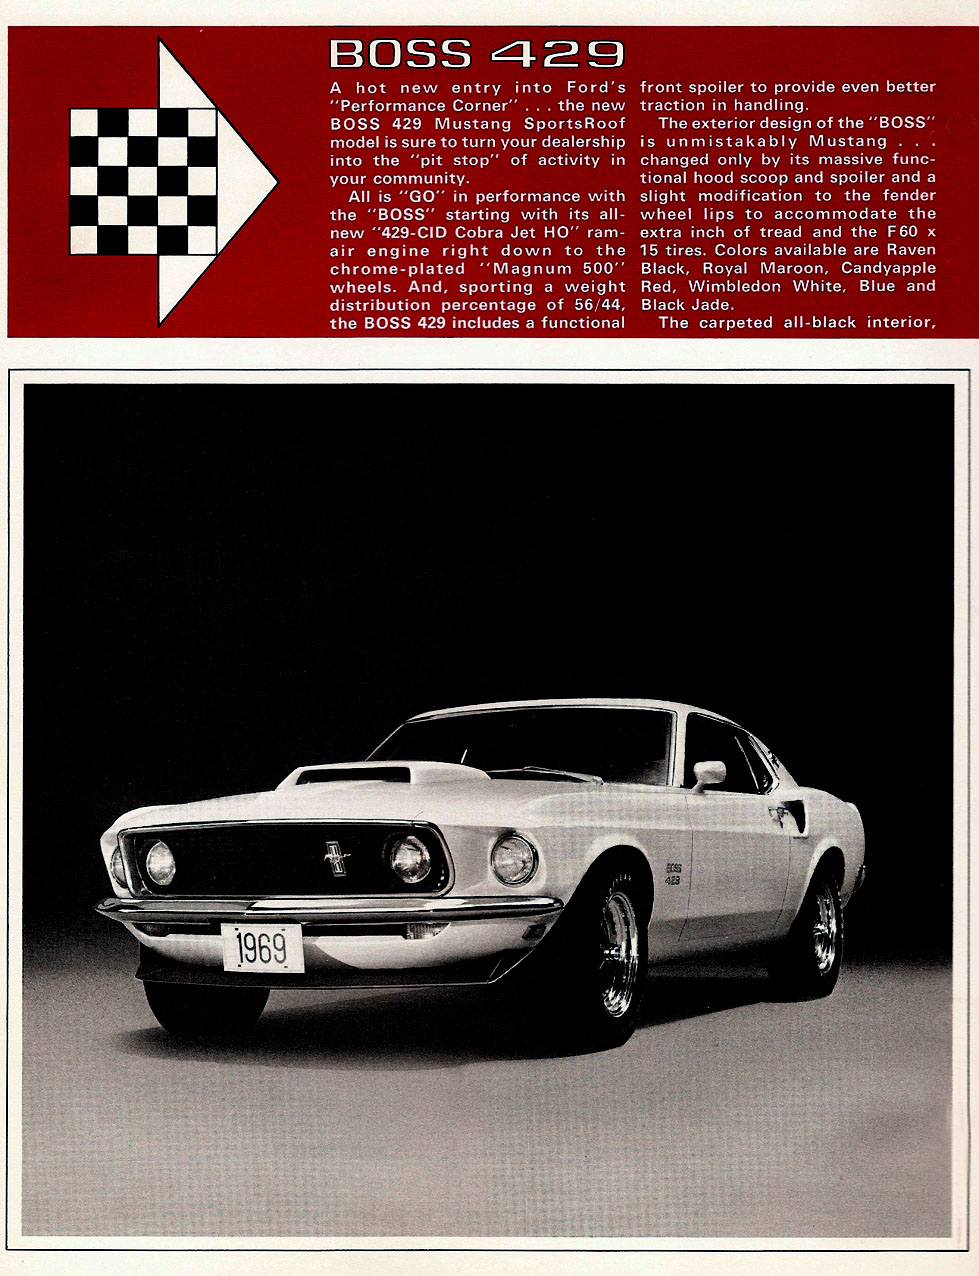 1969_Ford_Mustang_Boss_429-02